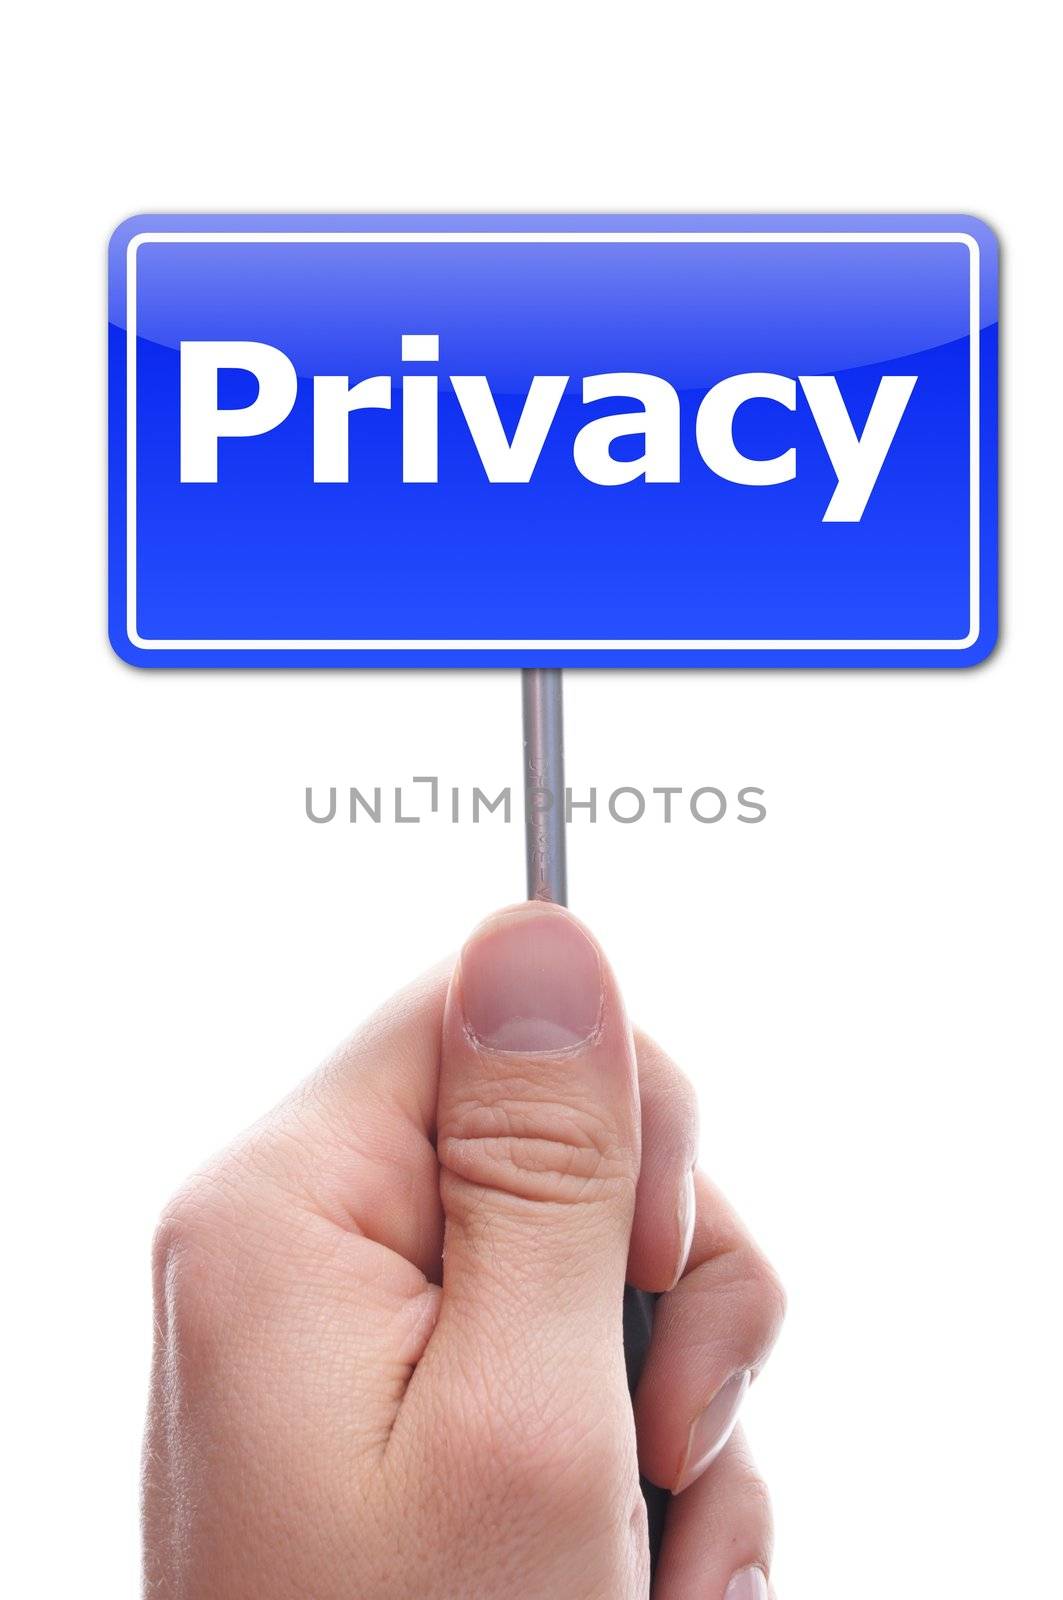 privacy concept with hand word and paper